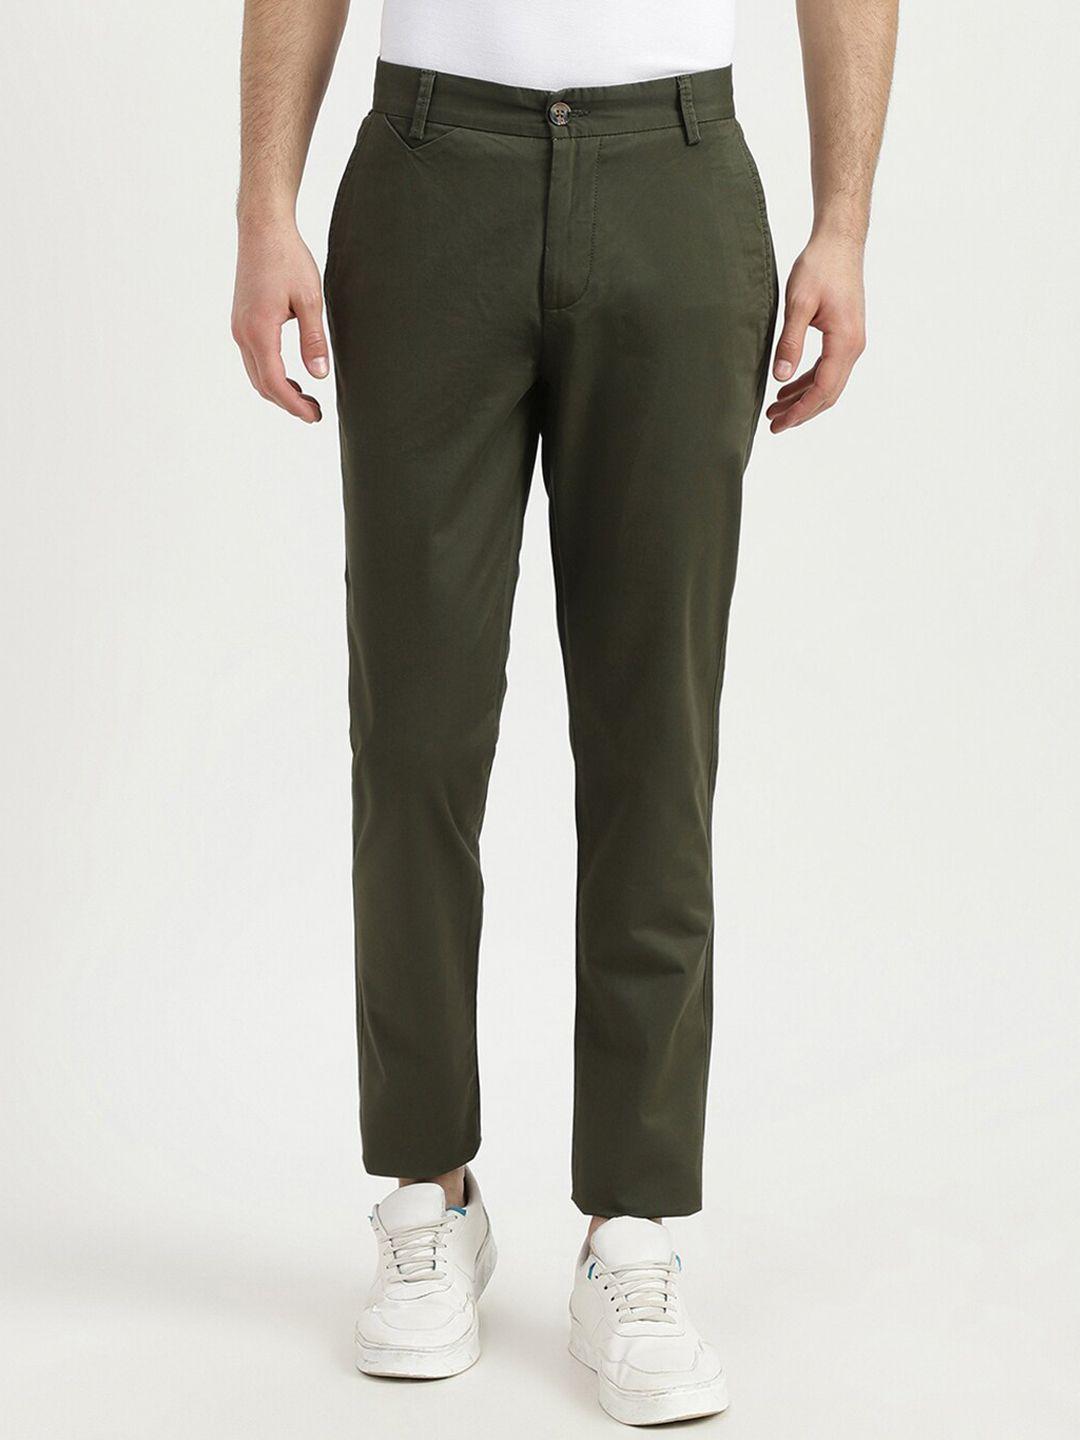 united colors of benetton men olive green cotton solid slim fit trousers